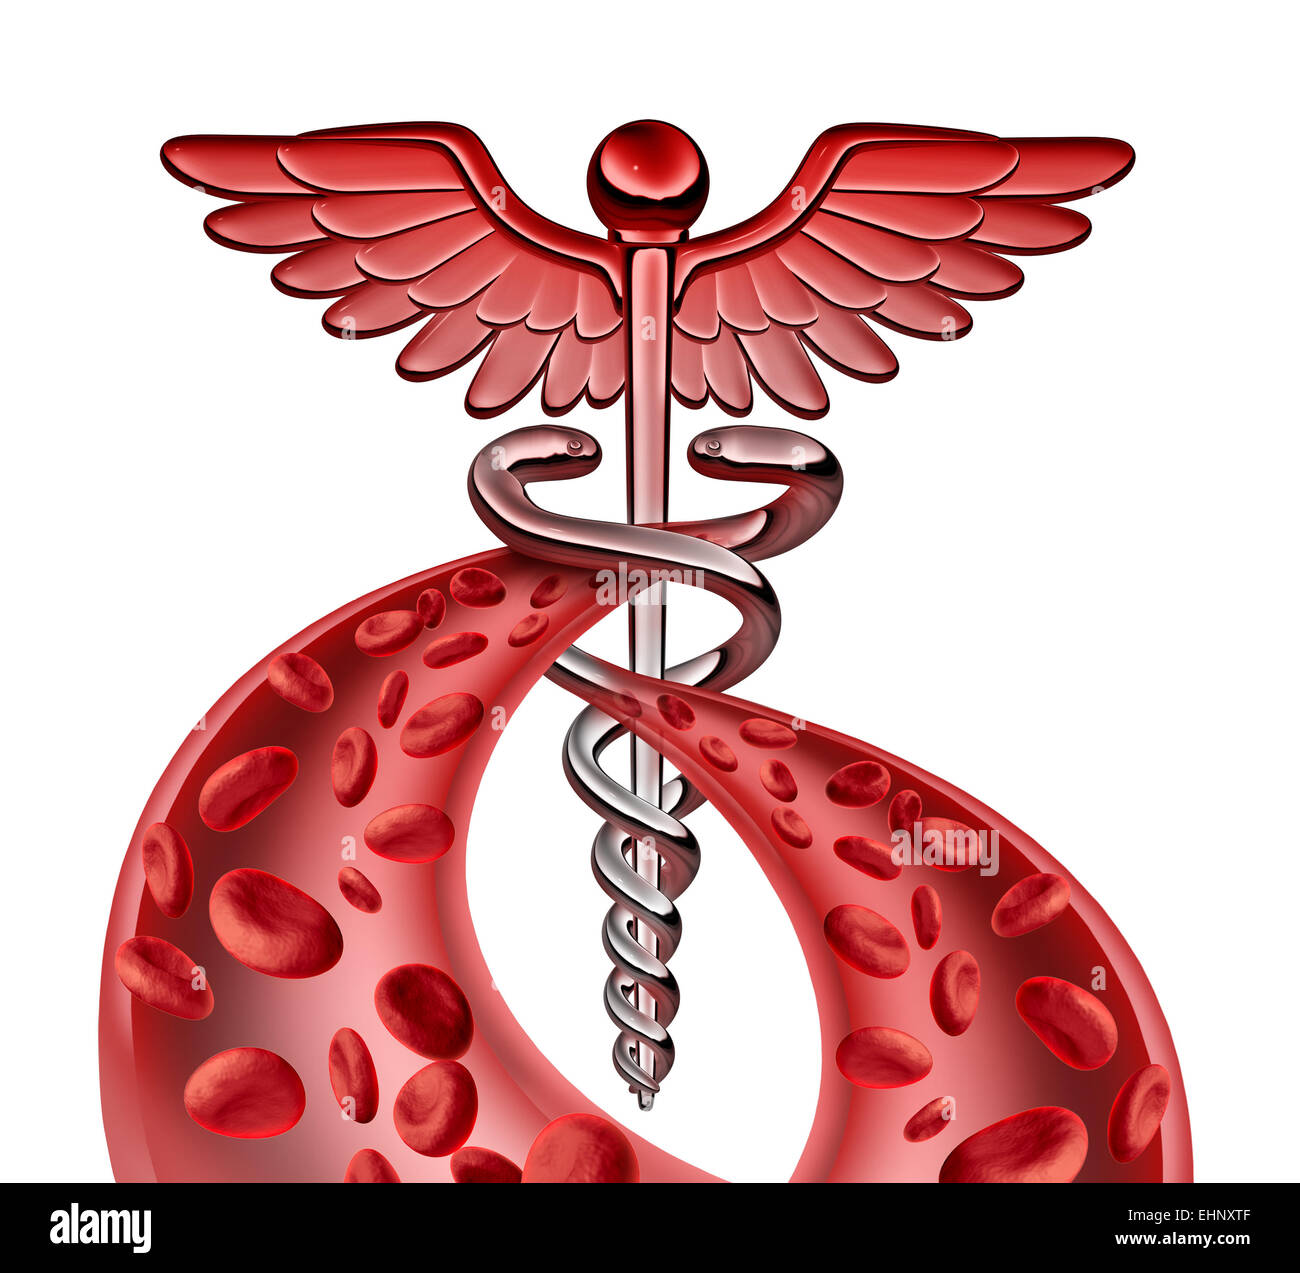 Medical blood symbol concept as a caduceus icon with veins or human srteries carrying blood cells in forced perspective as a metaphor for health care support. Stock Photo